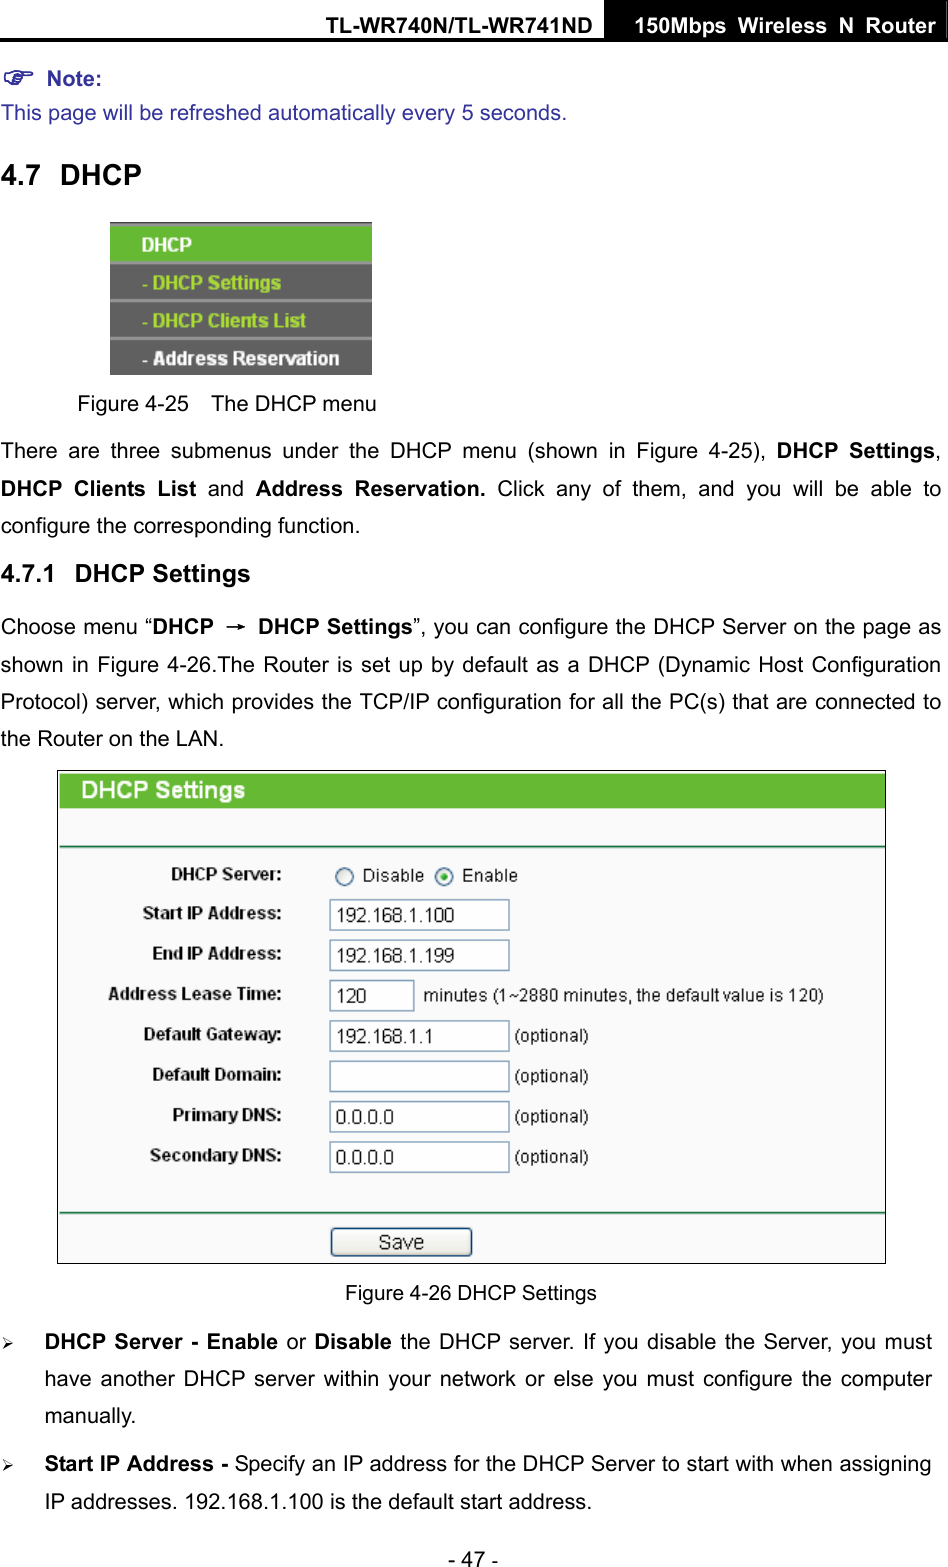 TL-WR740N/TL-WR741ND 150Mbps Wireless N Router - 47 - ) Note:  This page will be refreshed automatically every 5 seconds. 4.7  DHCP  Figure 4-25    The DHCP menu There are three submenus under the DHCP menu (shown in Figure 4-25),  DHCP Settings, DHCP Clients List and  Address Reservation. Click any of them, and you will be able to configure the corresponding function. 4.7.1  DHCP Settings Choose menu “DHCP  → DHCP Settings”, you can configure the DHCP Server on the page as shown in Figure 4-26.The Router is set up by default as a DHCP (Dynamic Host Configuration Protocol) server, which provides the TCP/IP configuration for all the PC(s) that are connected to the Router on the LAN.    Figure 4-26 DHCP Settings ¾ DHCP Server - Enable or Disable the DHCP server. If you disable the Server, you must have another DHCP server within your network or else you must configure the computer manually. ¾ Start IP Address - Specify an IP address for the DHCP Server to start with when assigning IP addresses. 192.168.1.100 is the default start address. 